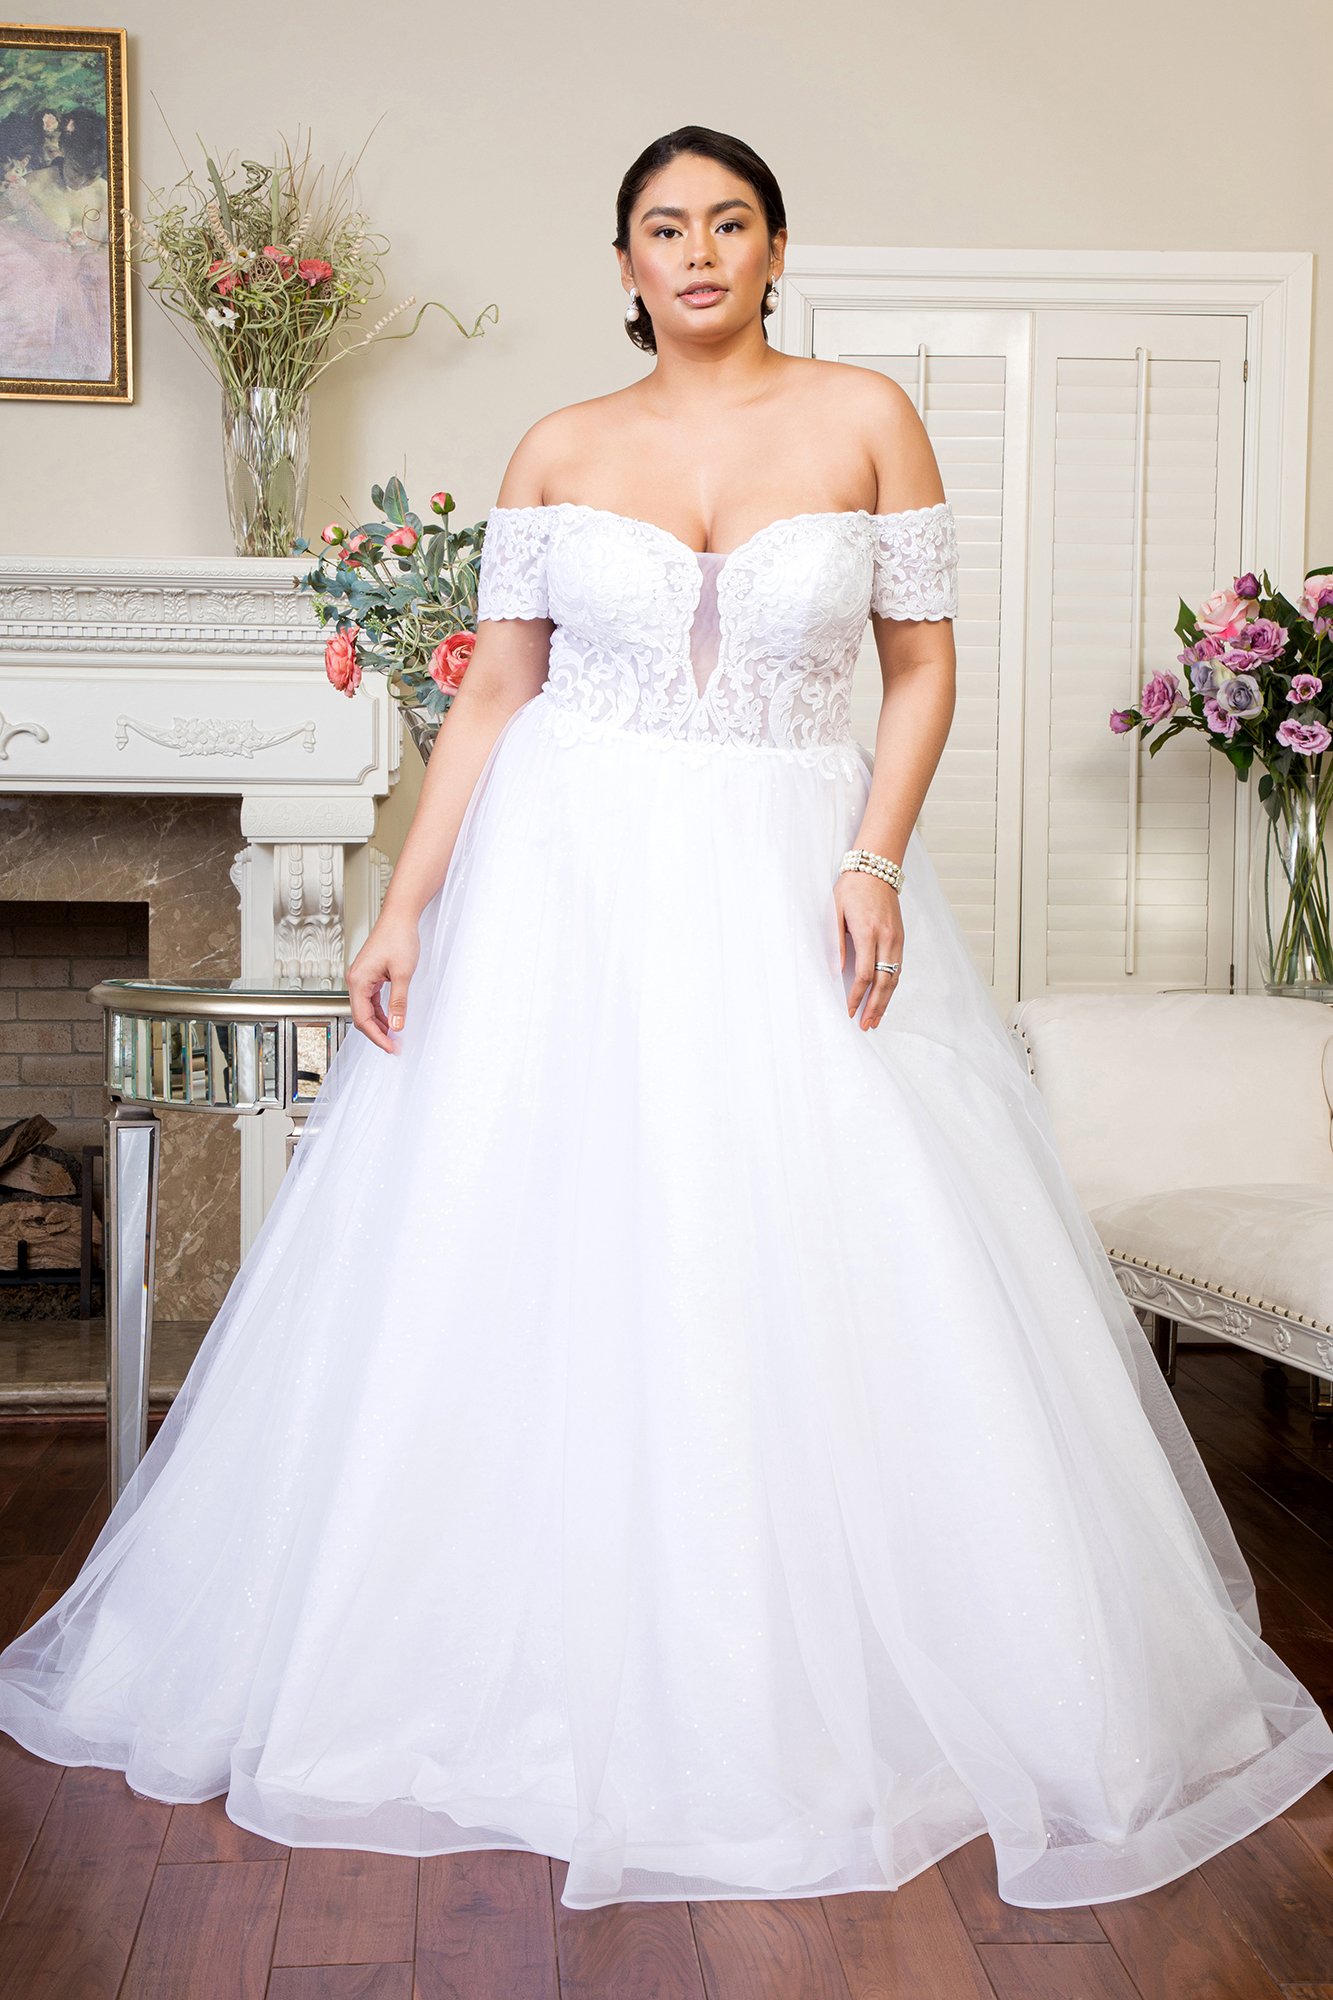 Short Sleeve A-line Wedding Dress With Embellished Bodice And Tulle Skirt  With Sparkle Detailing | Kleinfeld Bridal